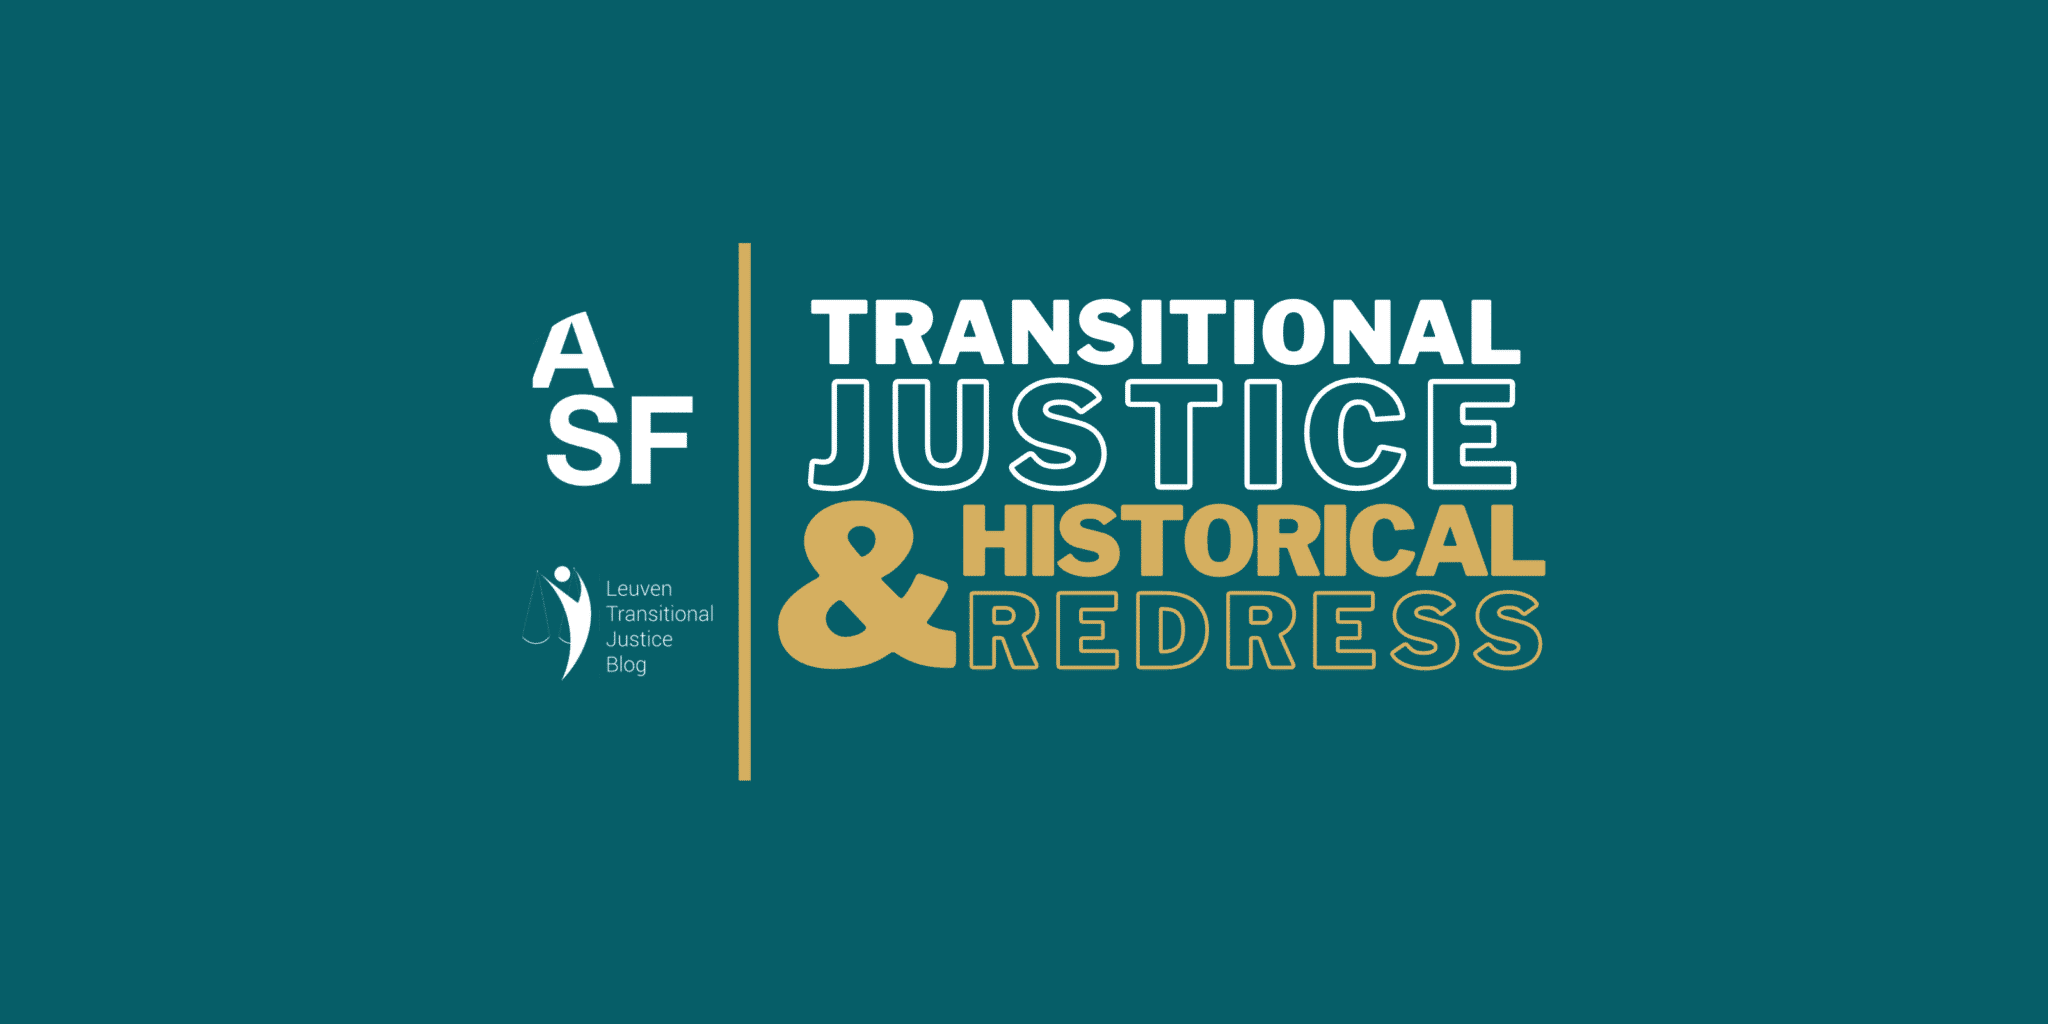 Transitional Justice & Historical Redress: A special series on historical injustices stemming from slavery and colonialism